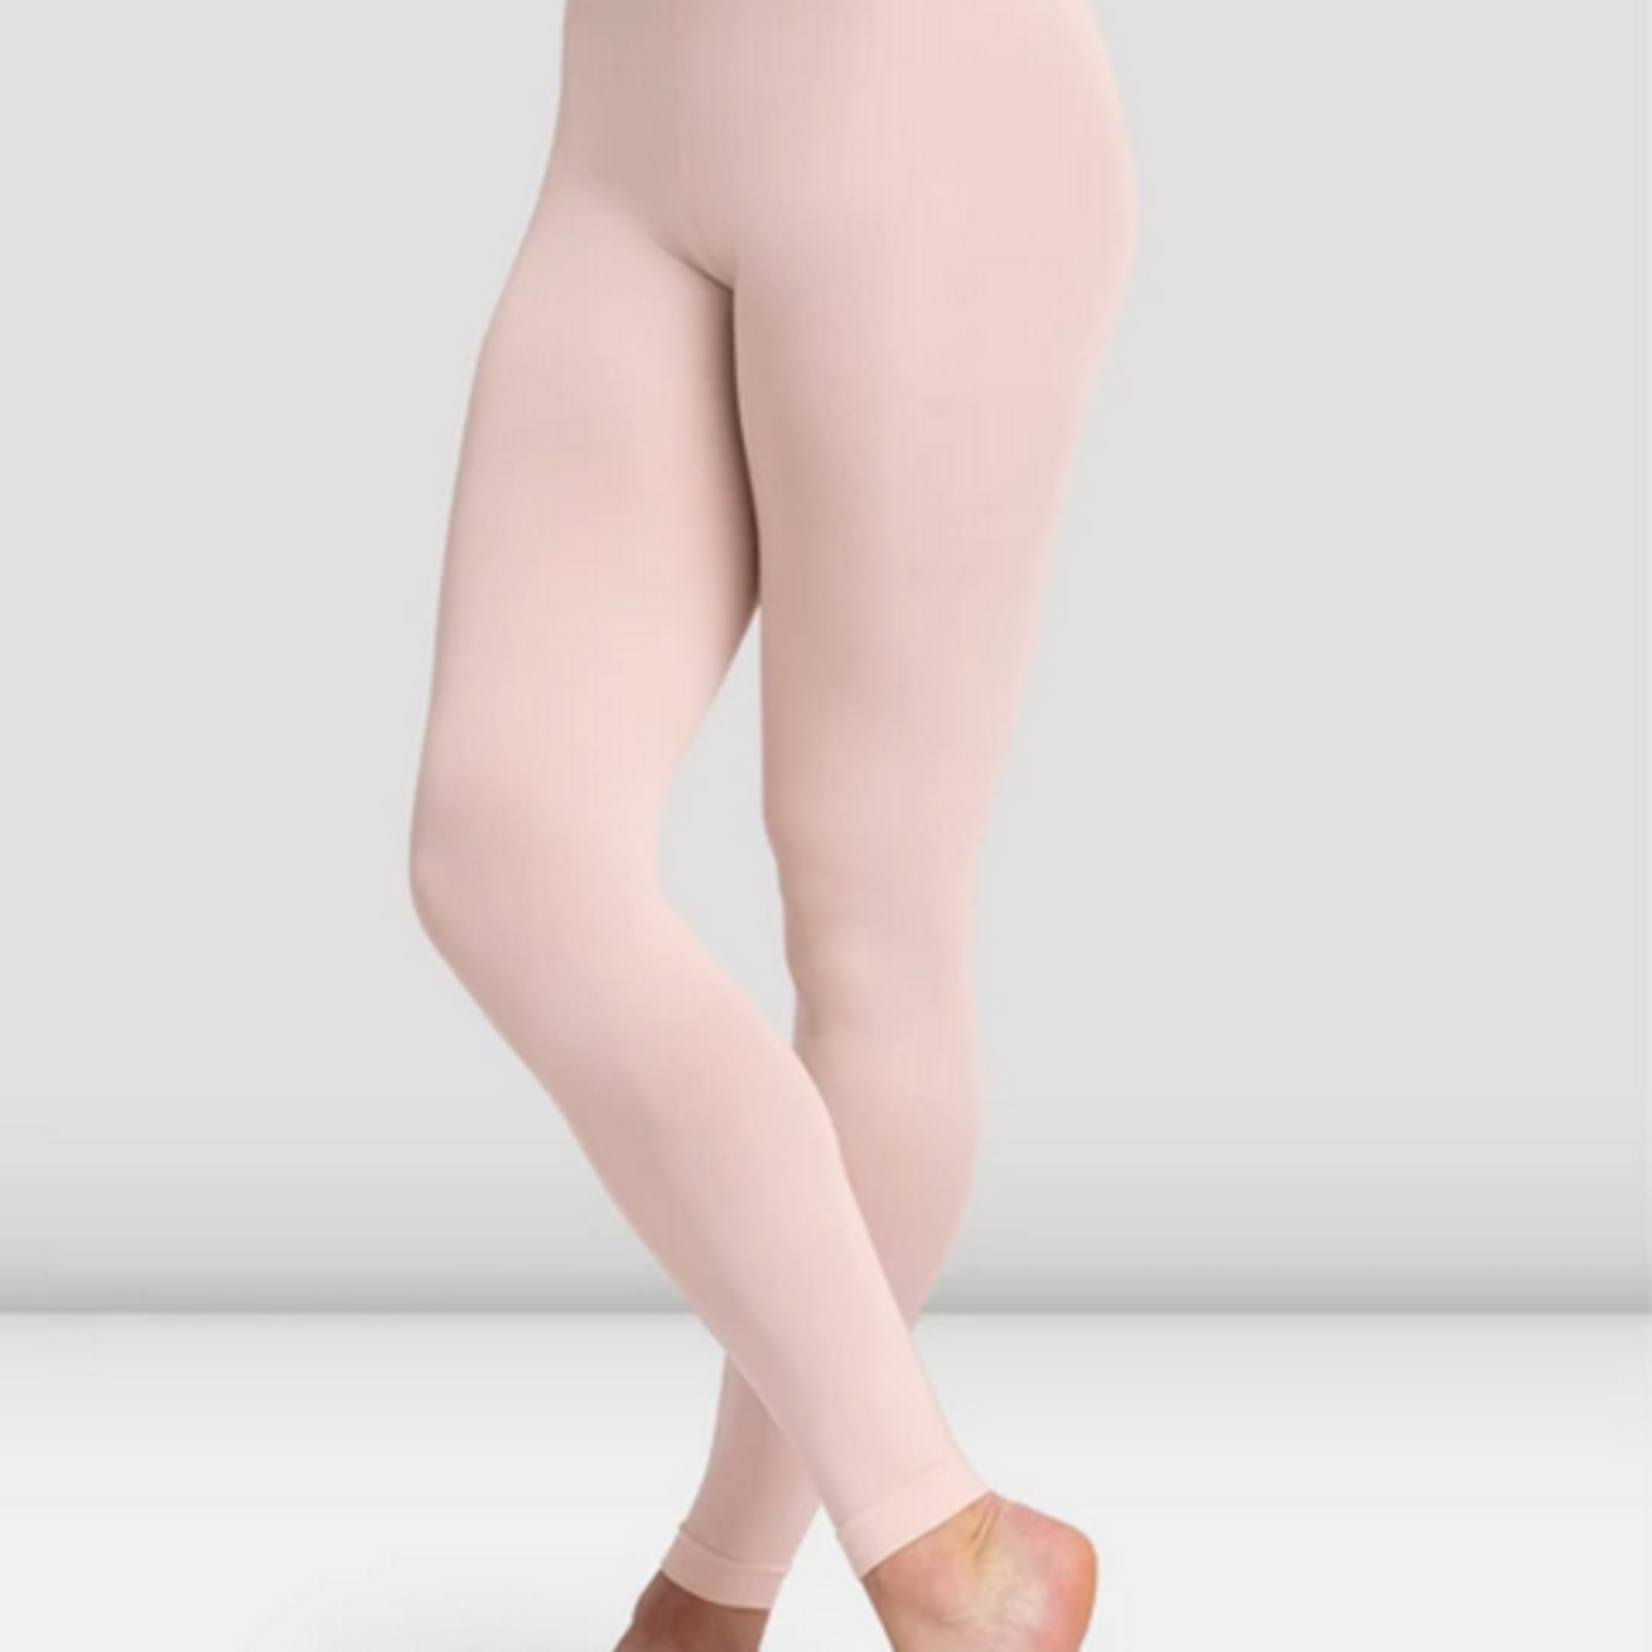 Child White Footless Tights